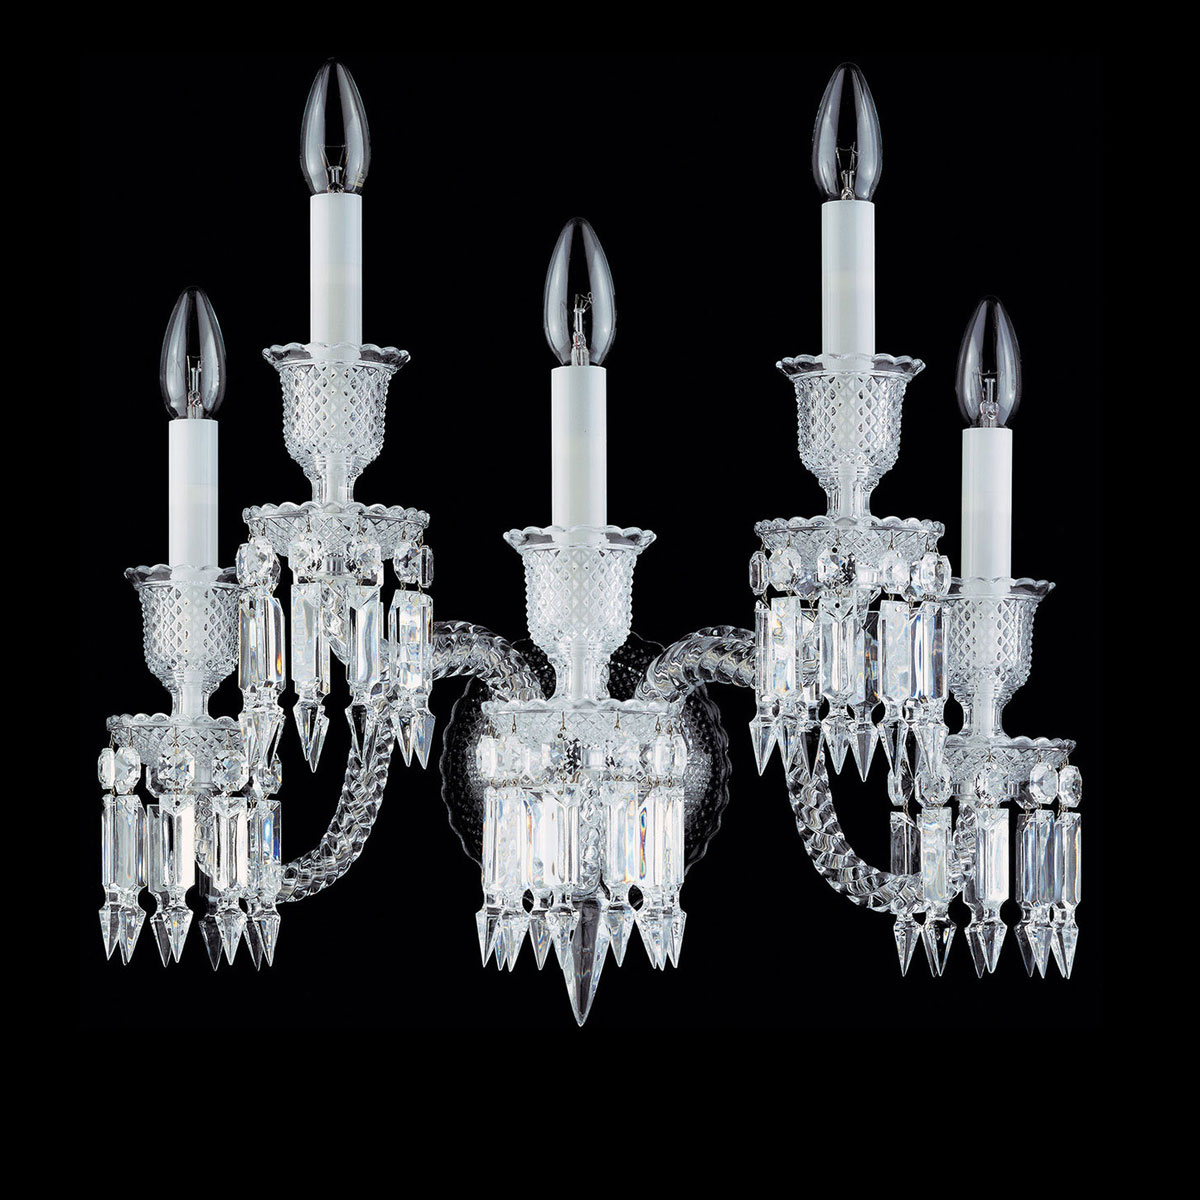 Baccarat Crystal, Zenith 5 Light Wall Crystal Sconce